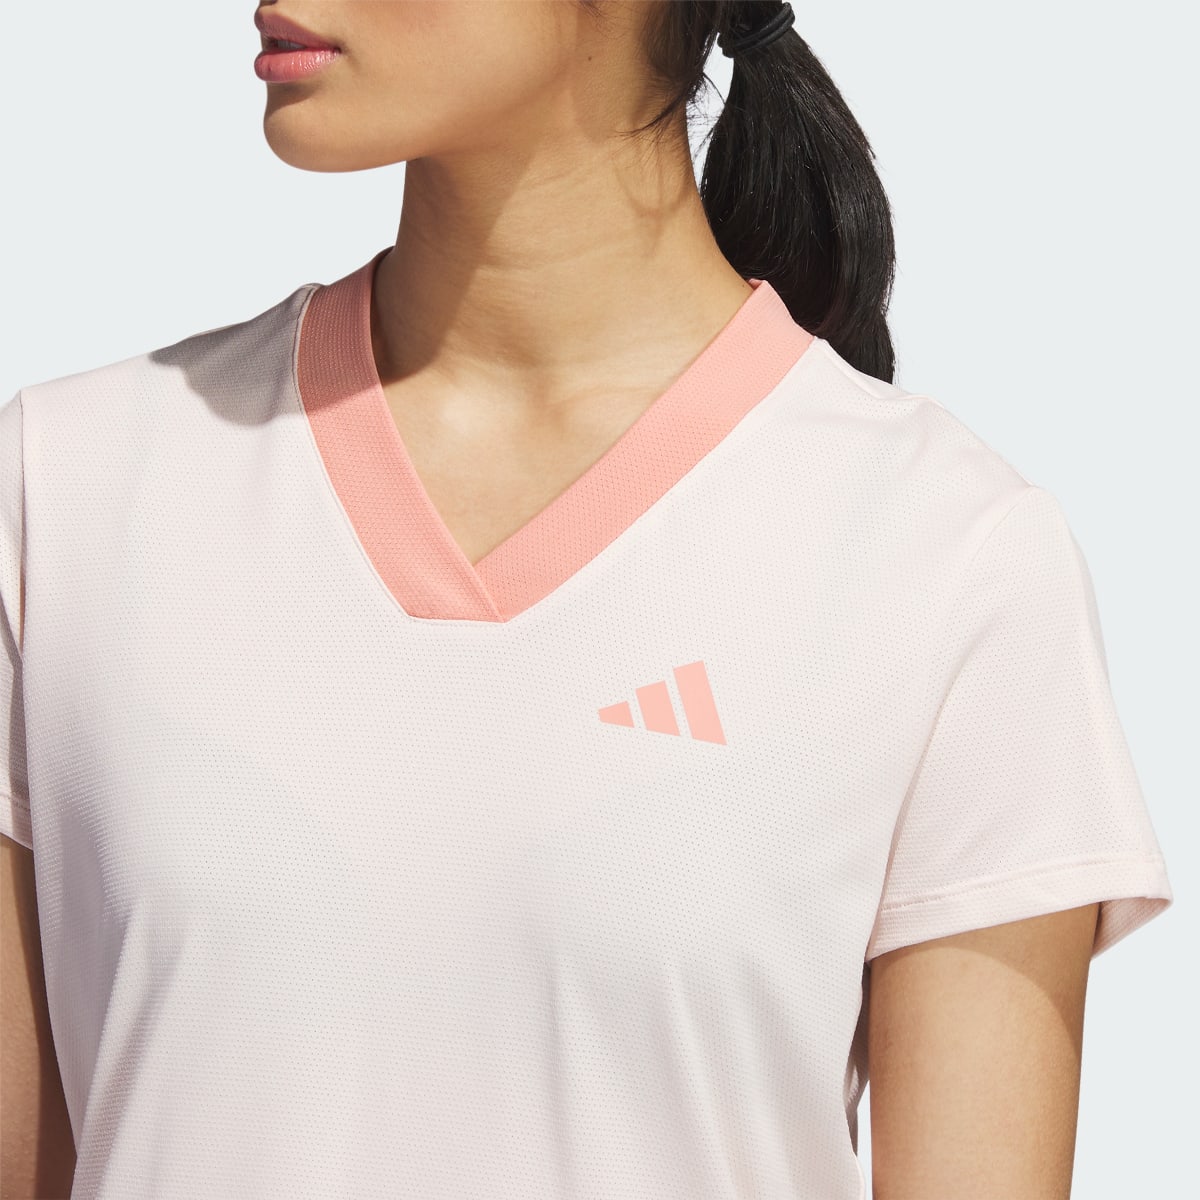 Adidas Made With Nature Golf Top. 7